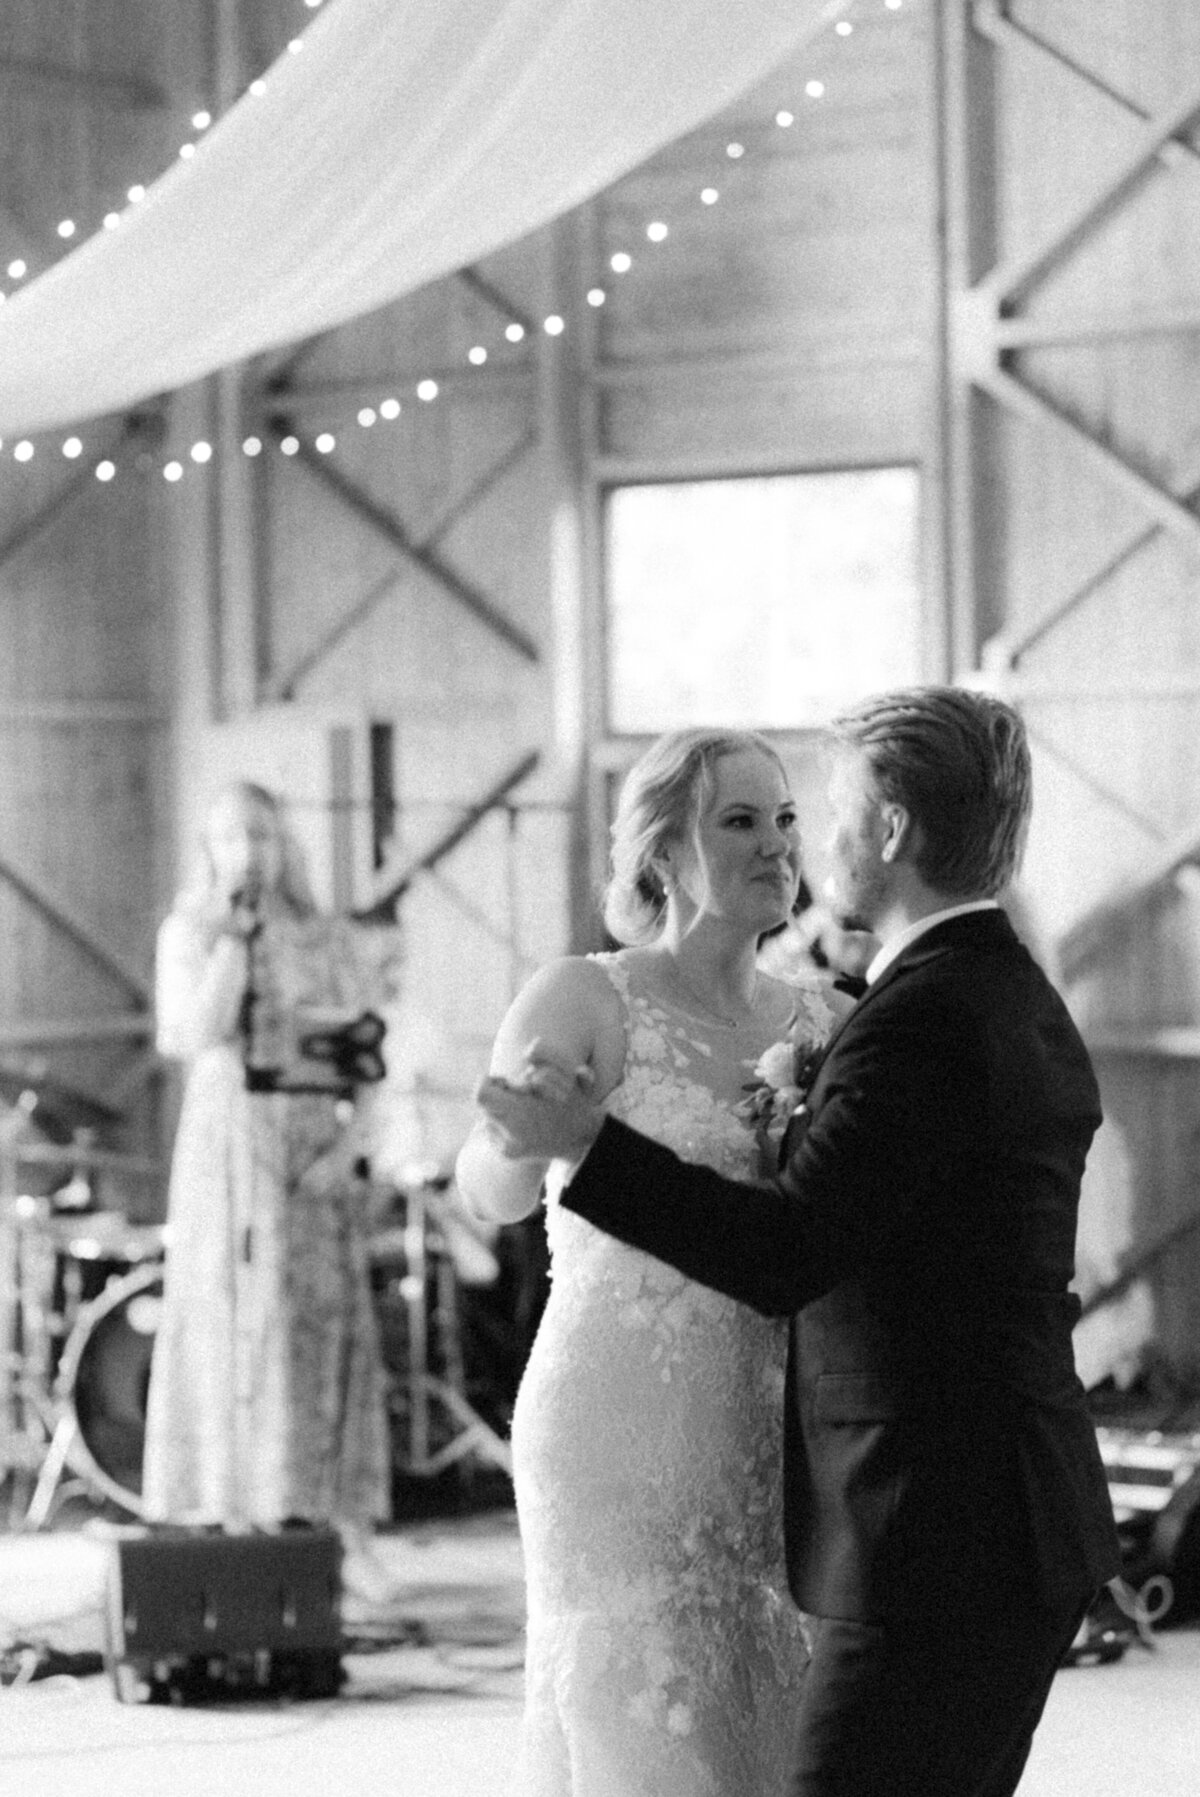 The wedding couple dancing the first dance in the wedding in an image photographed by wedding photographer Hannika Gabrielsson.